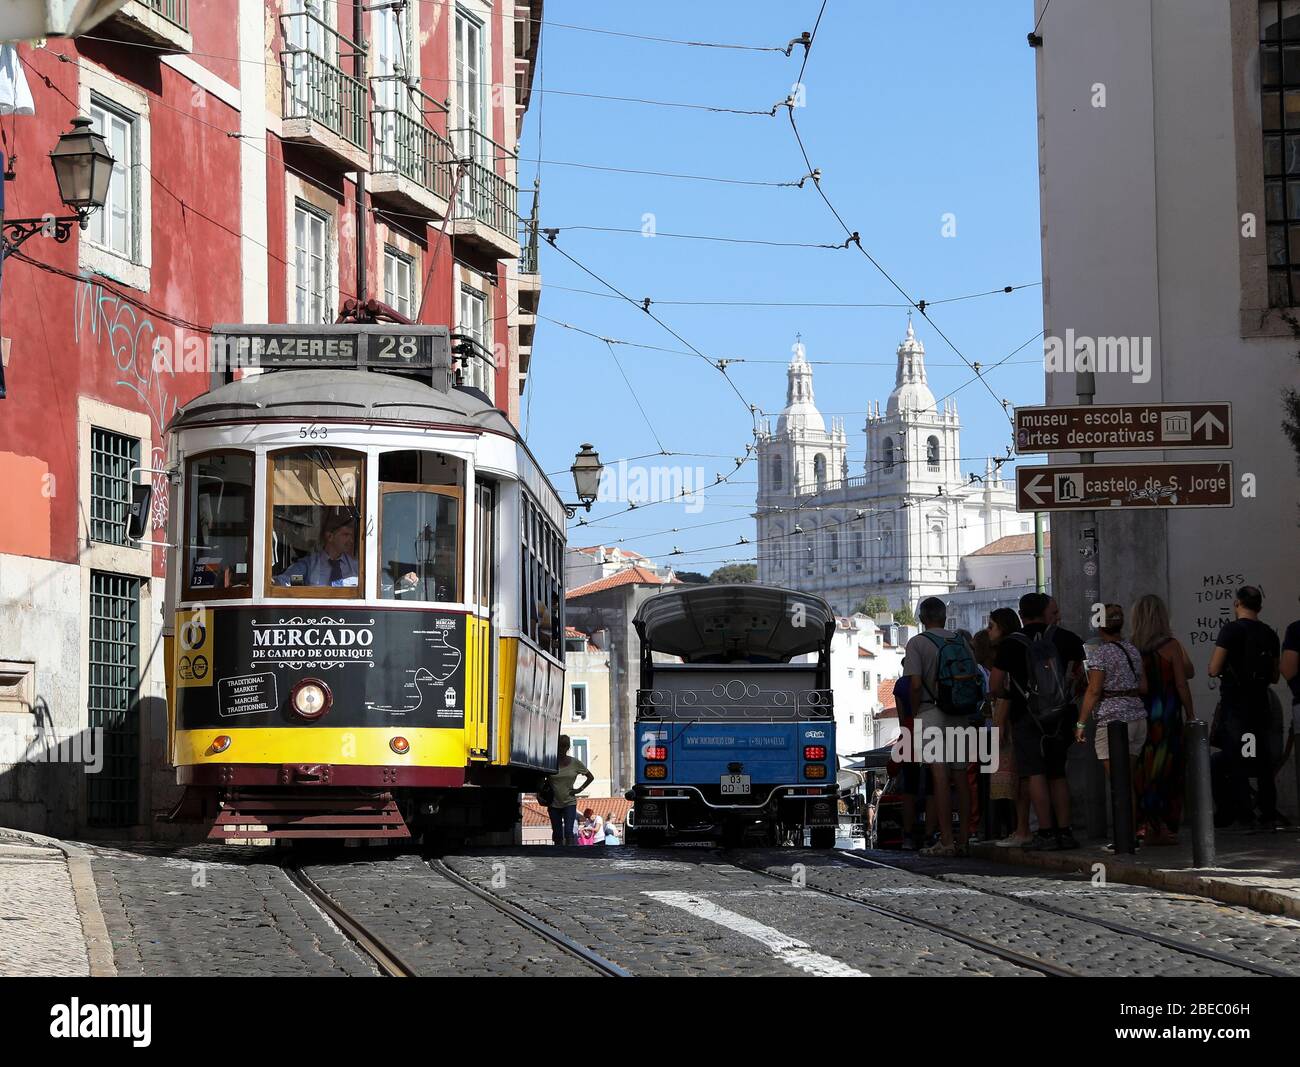 The Iconic Number 28 tram seen on the busy streets of Lisbon with Cathedral in the background. Stock Photo